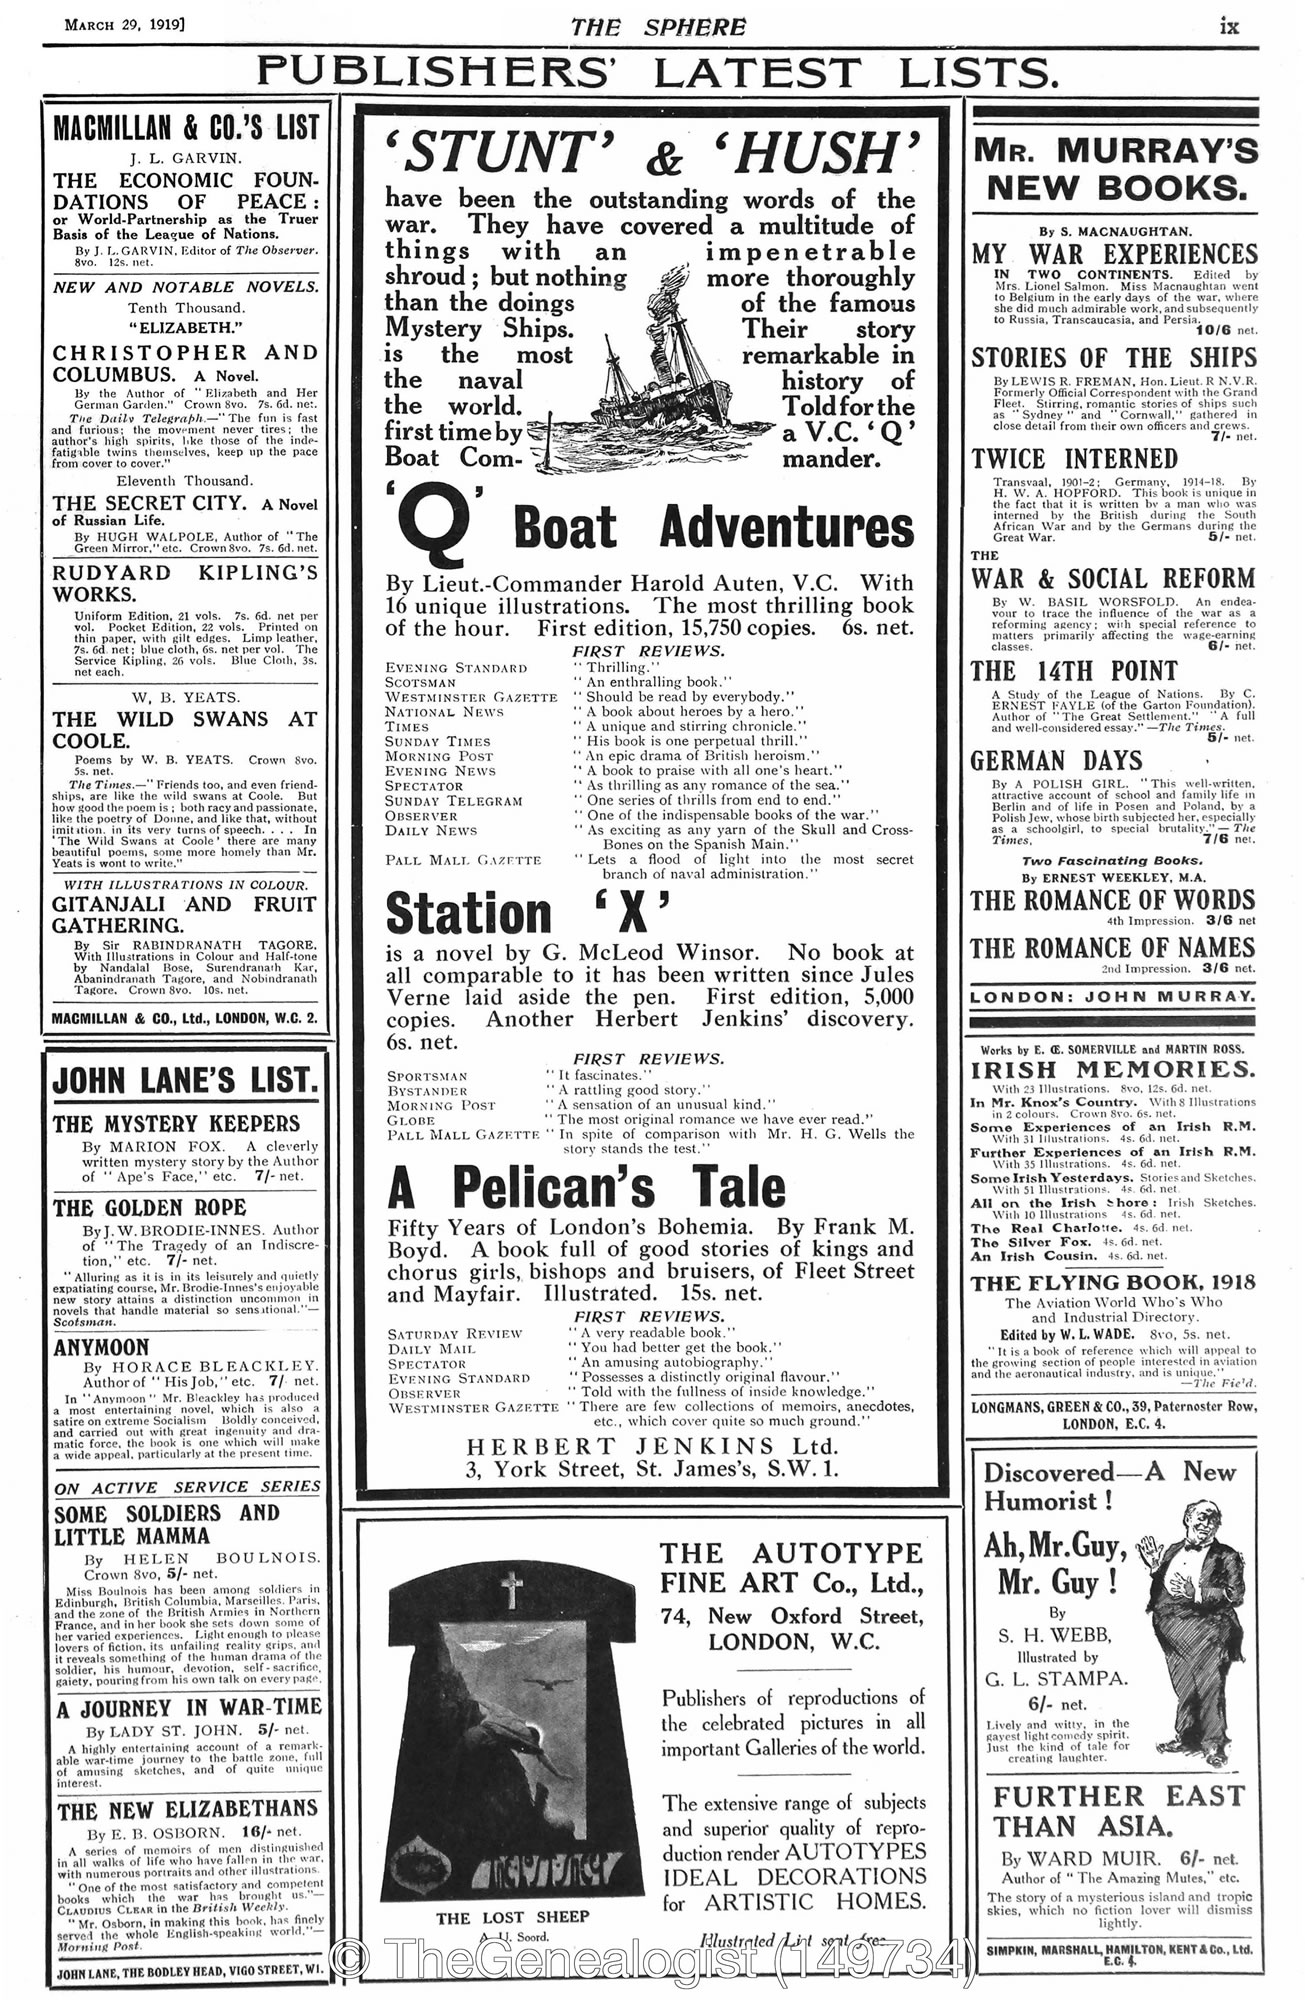 Advertisement for Q Boats Adventure, The Sphere March 29, 1919 from Newspapers and Magazines on TheGenealogist